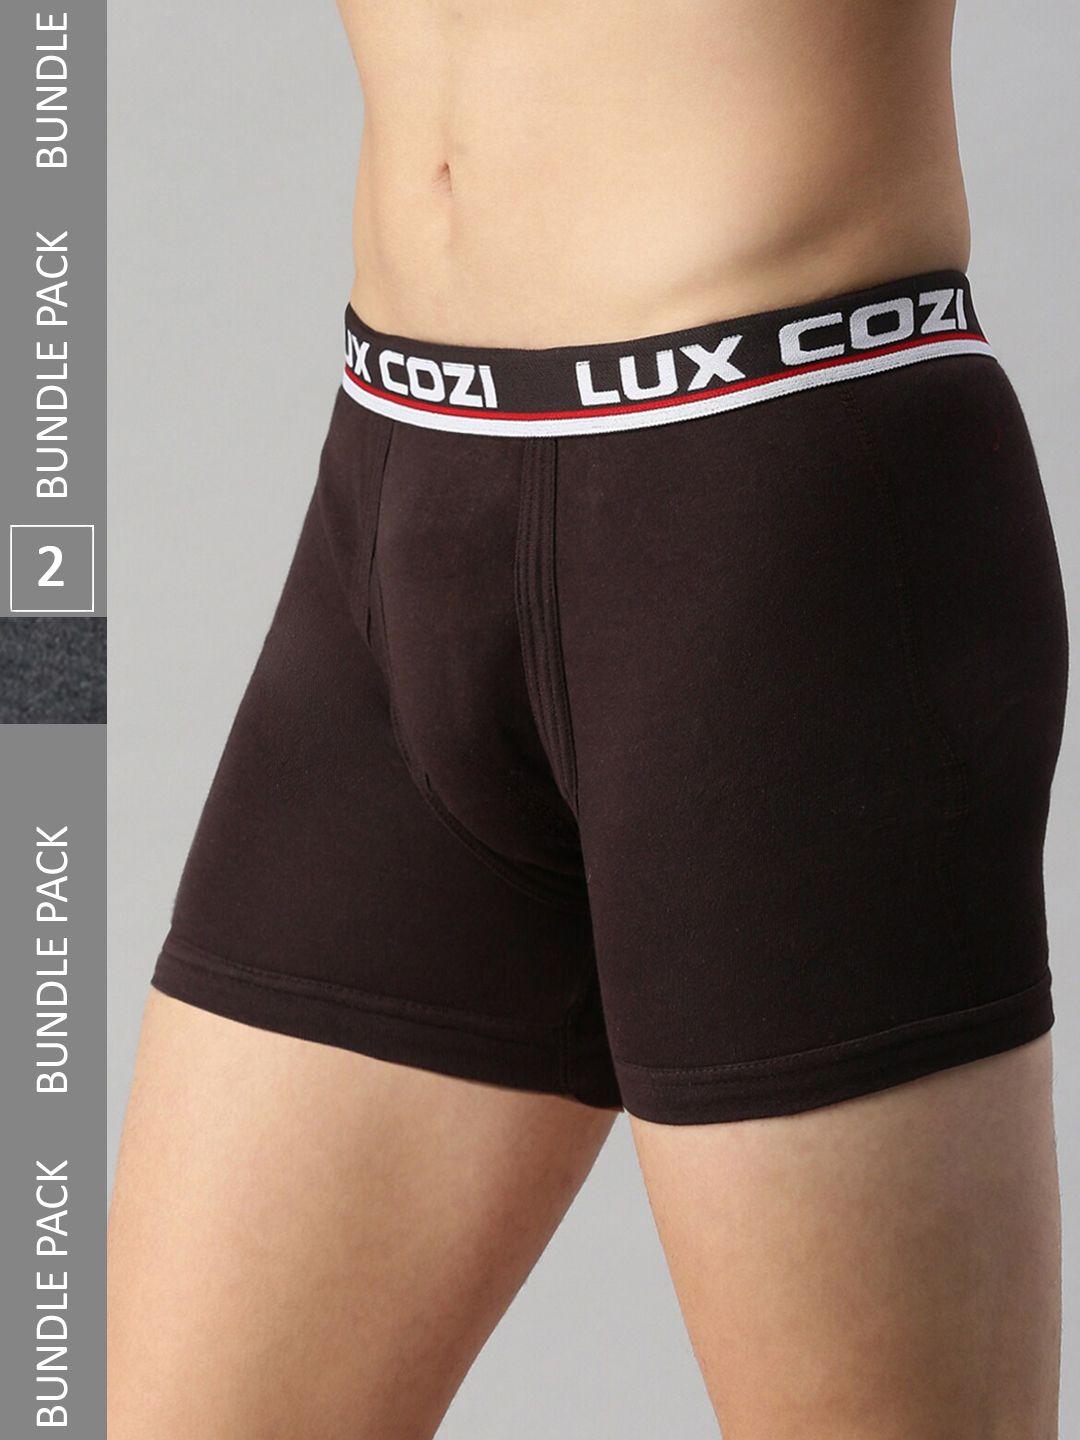 lux cozi pack of 2 skin-friendly label free comfort long cotton trunk